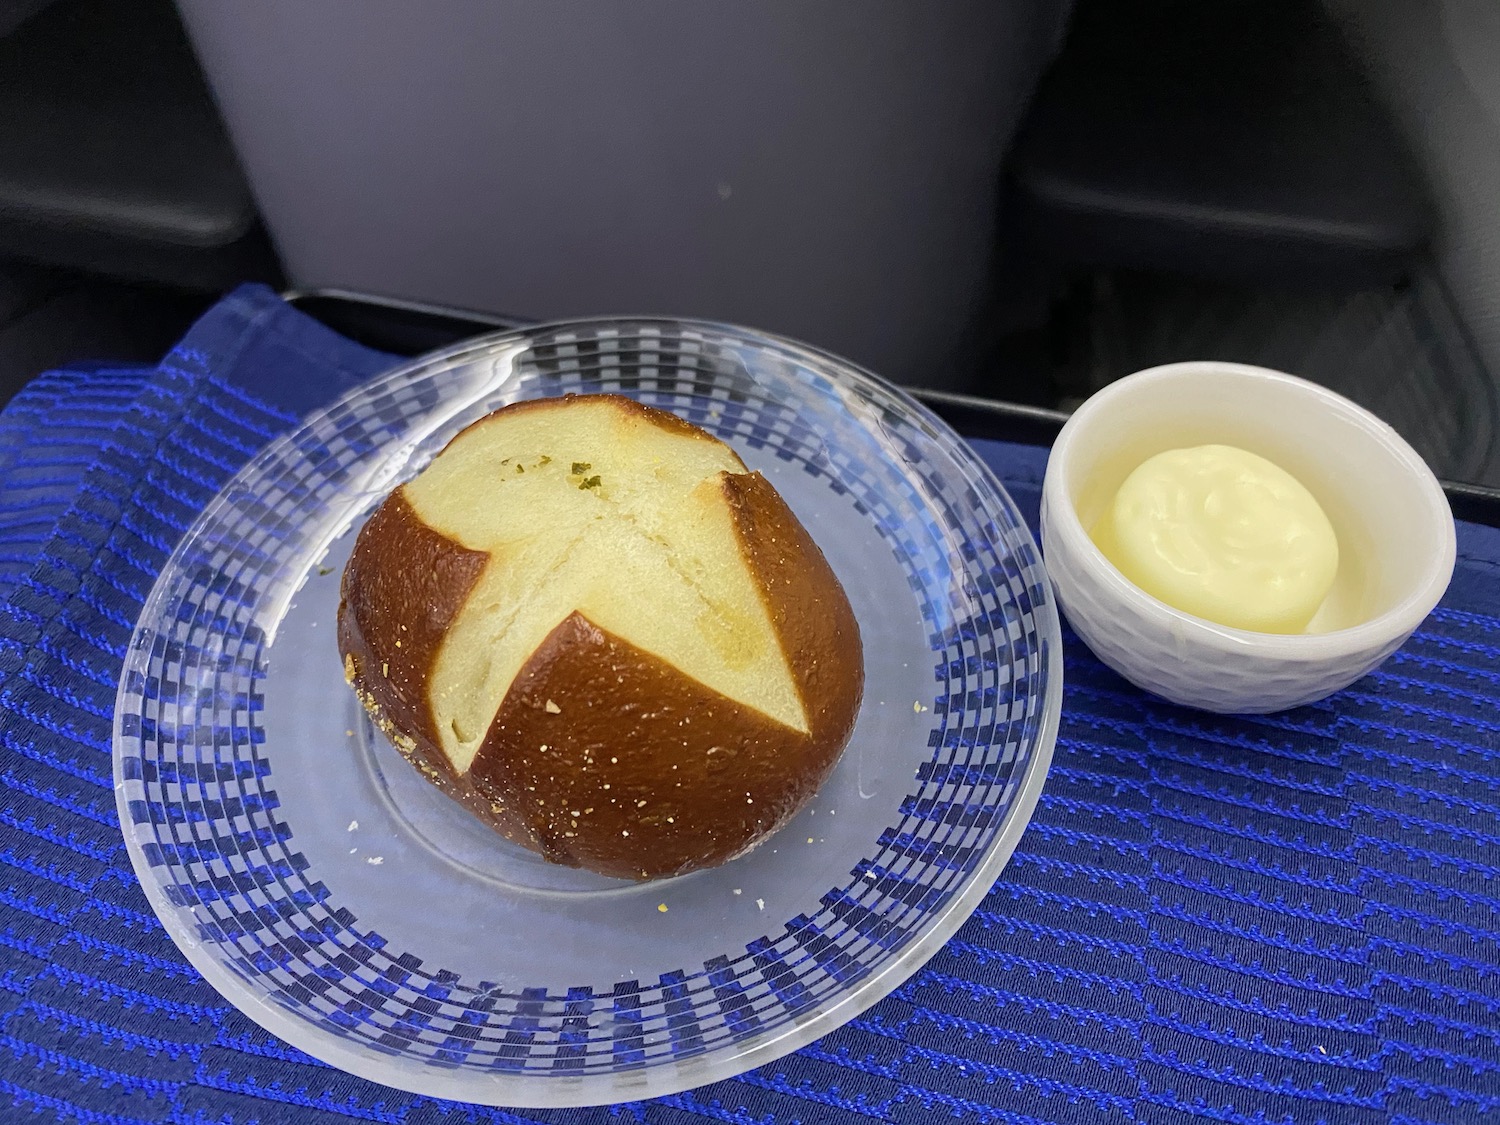 a bread roll on a plate with a small bowl of butter